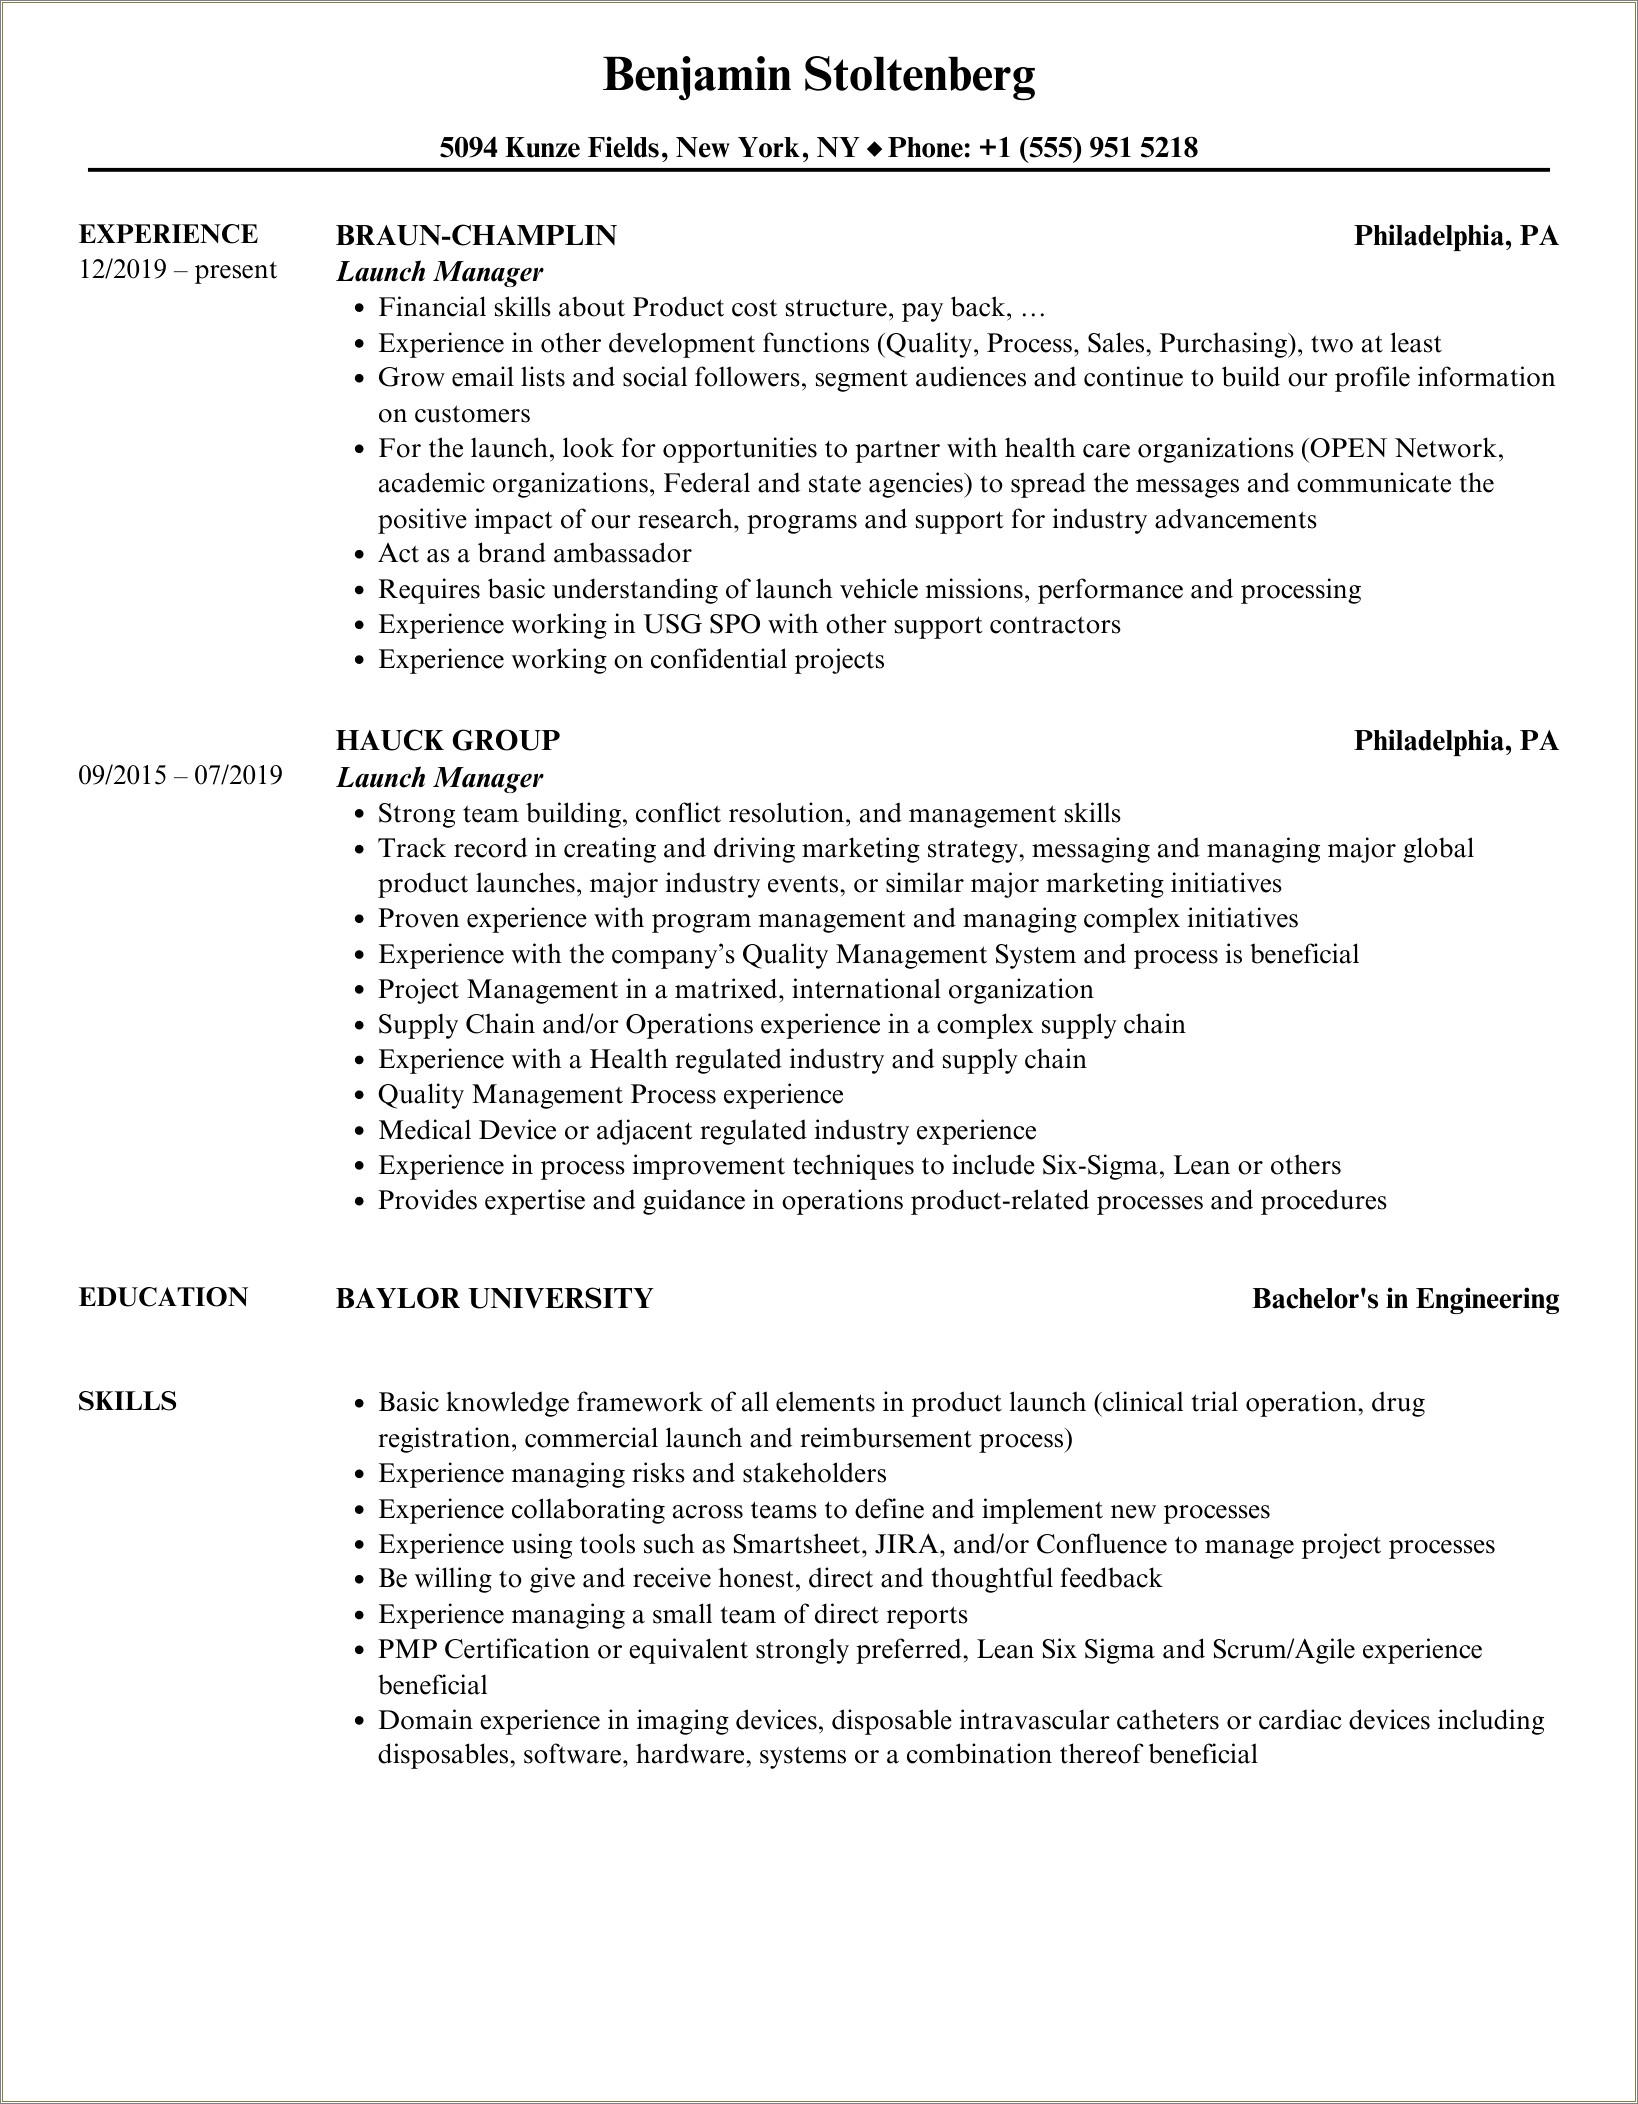 Resume Sample Part Of A Launch Group